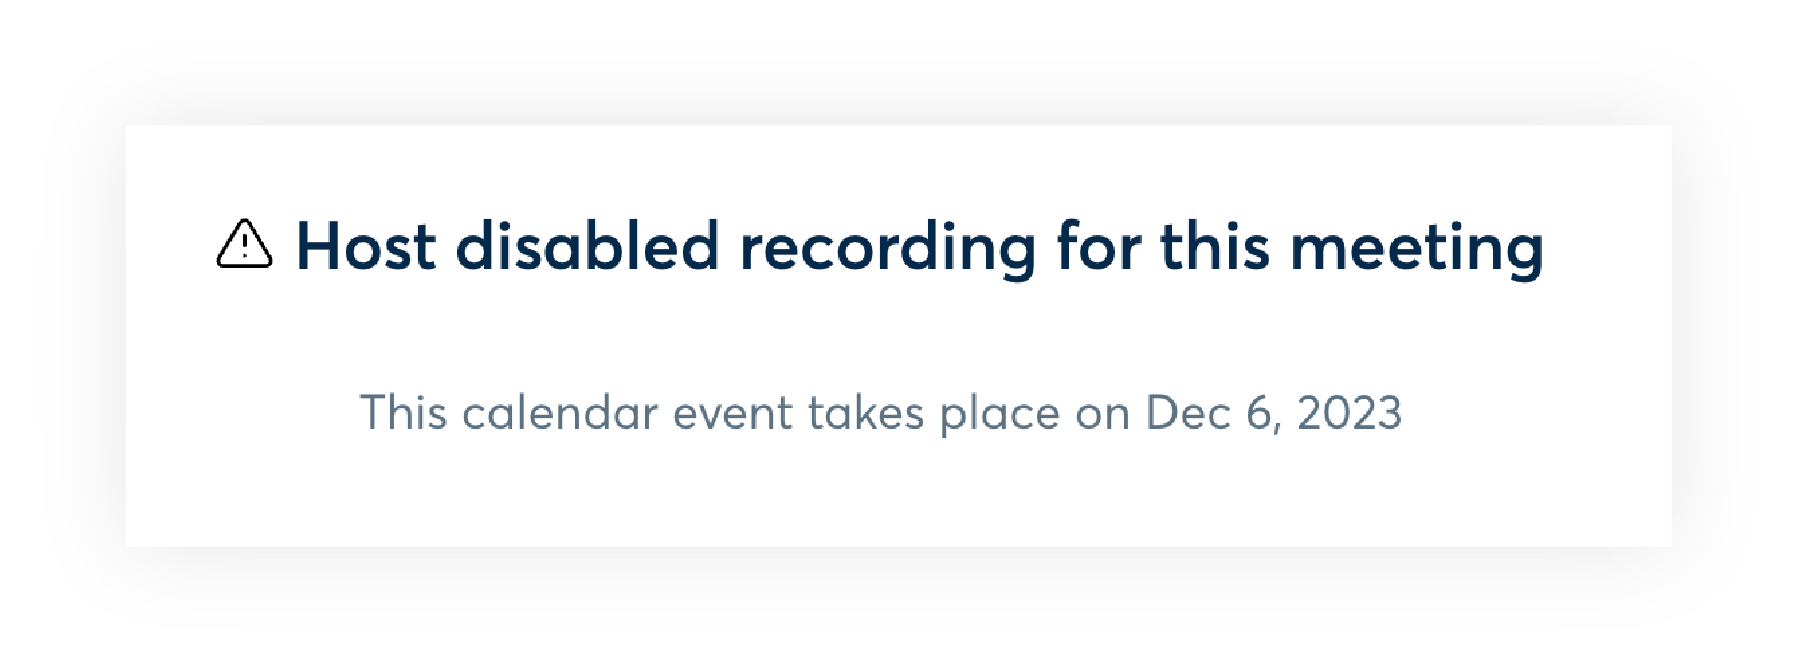 host disabled recording.png